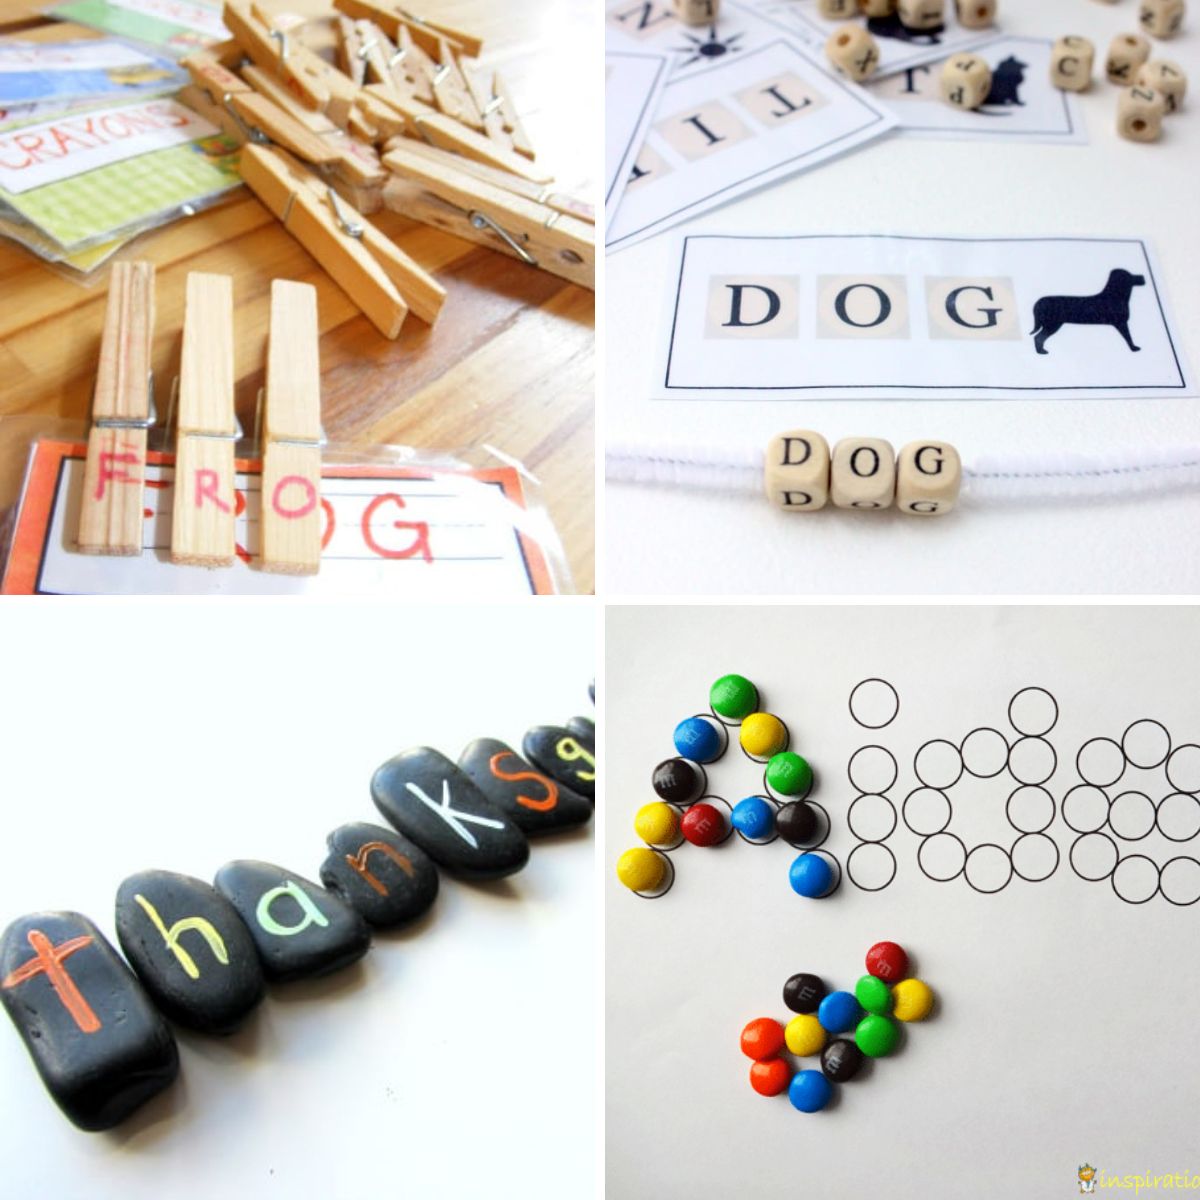 4 images of spelling activities for kids.